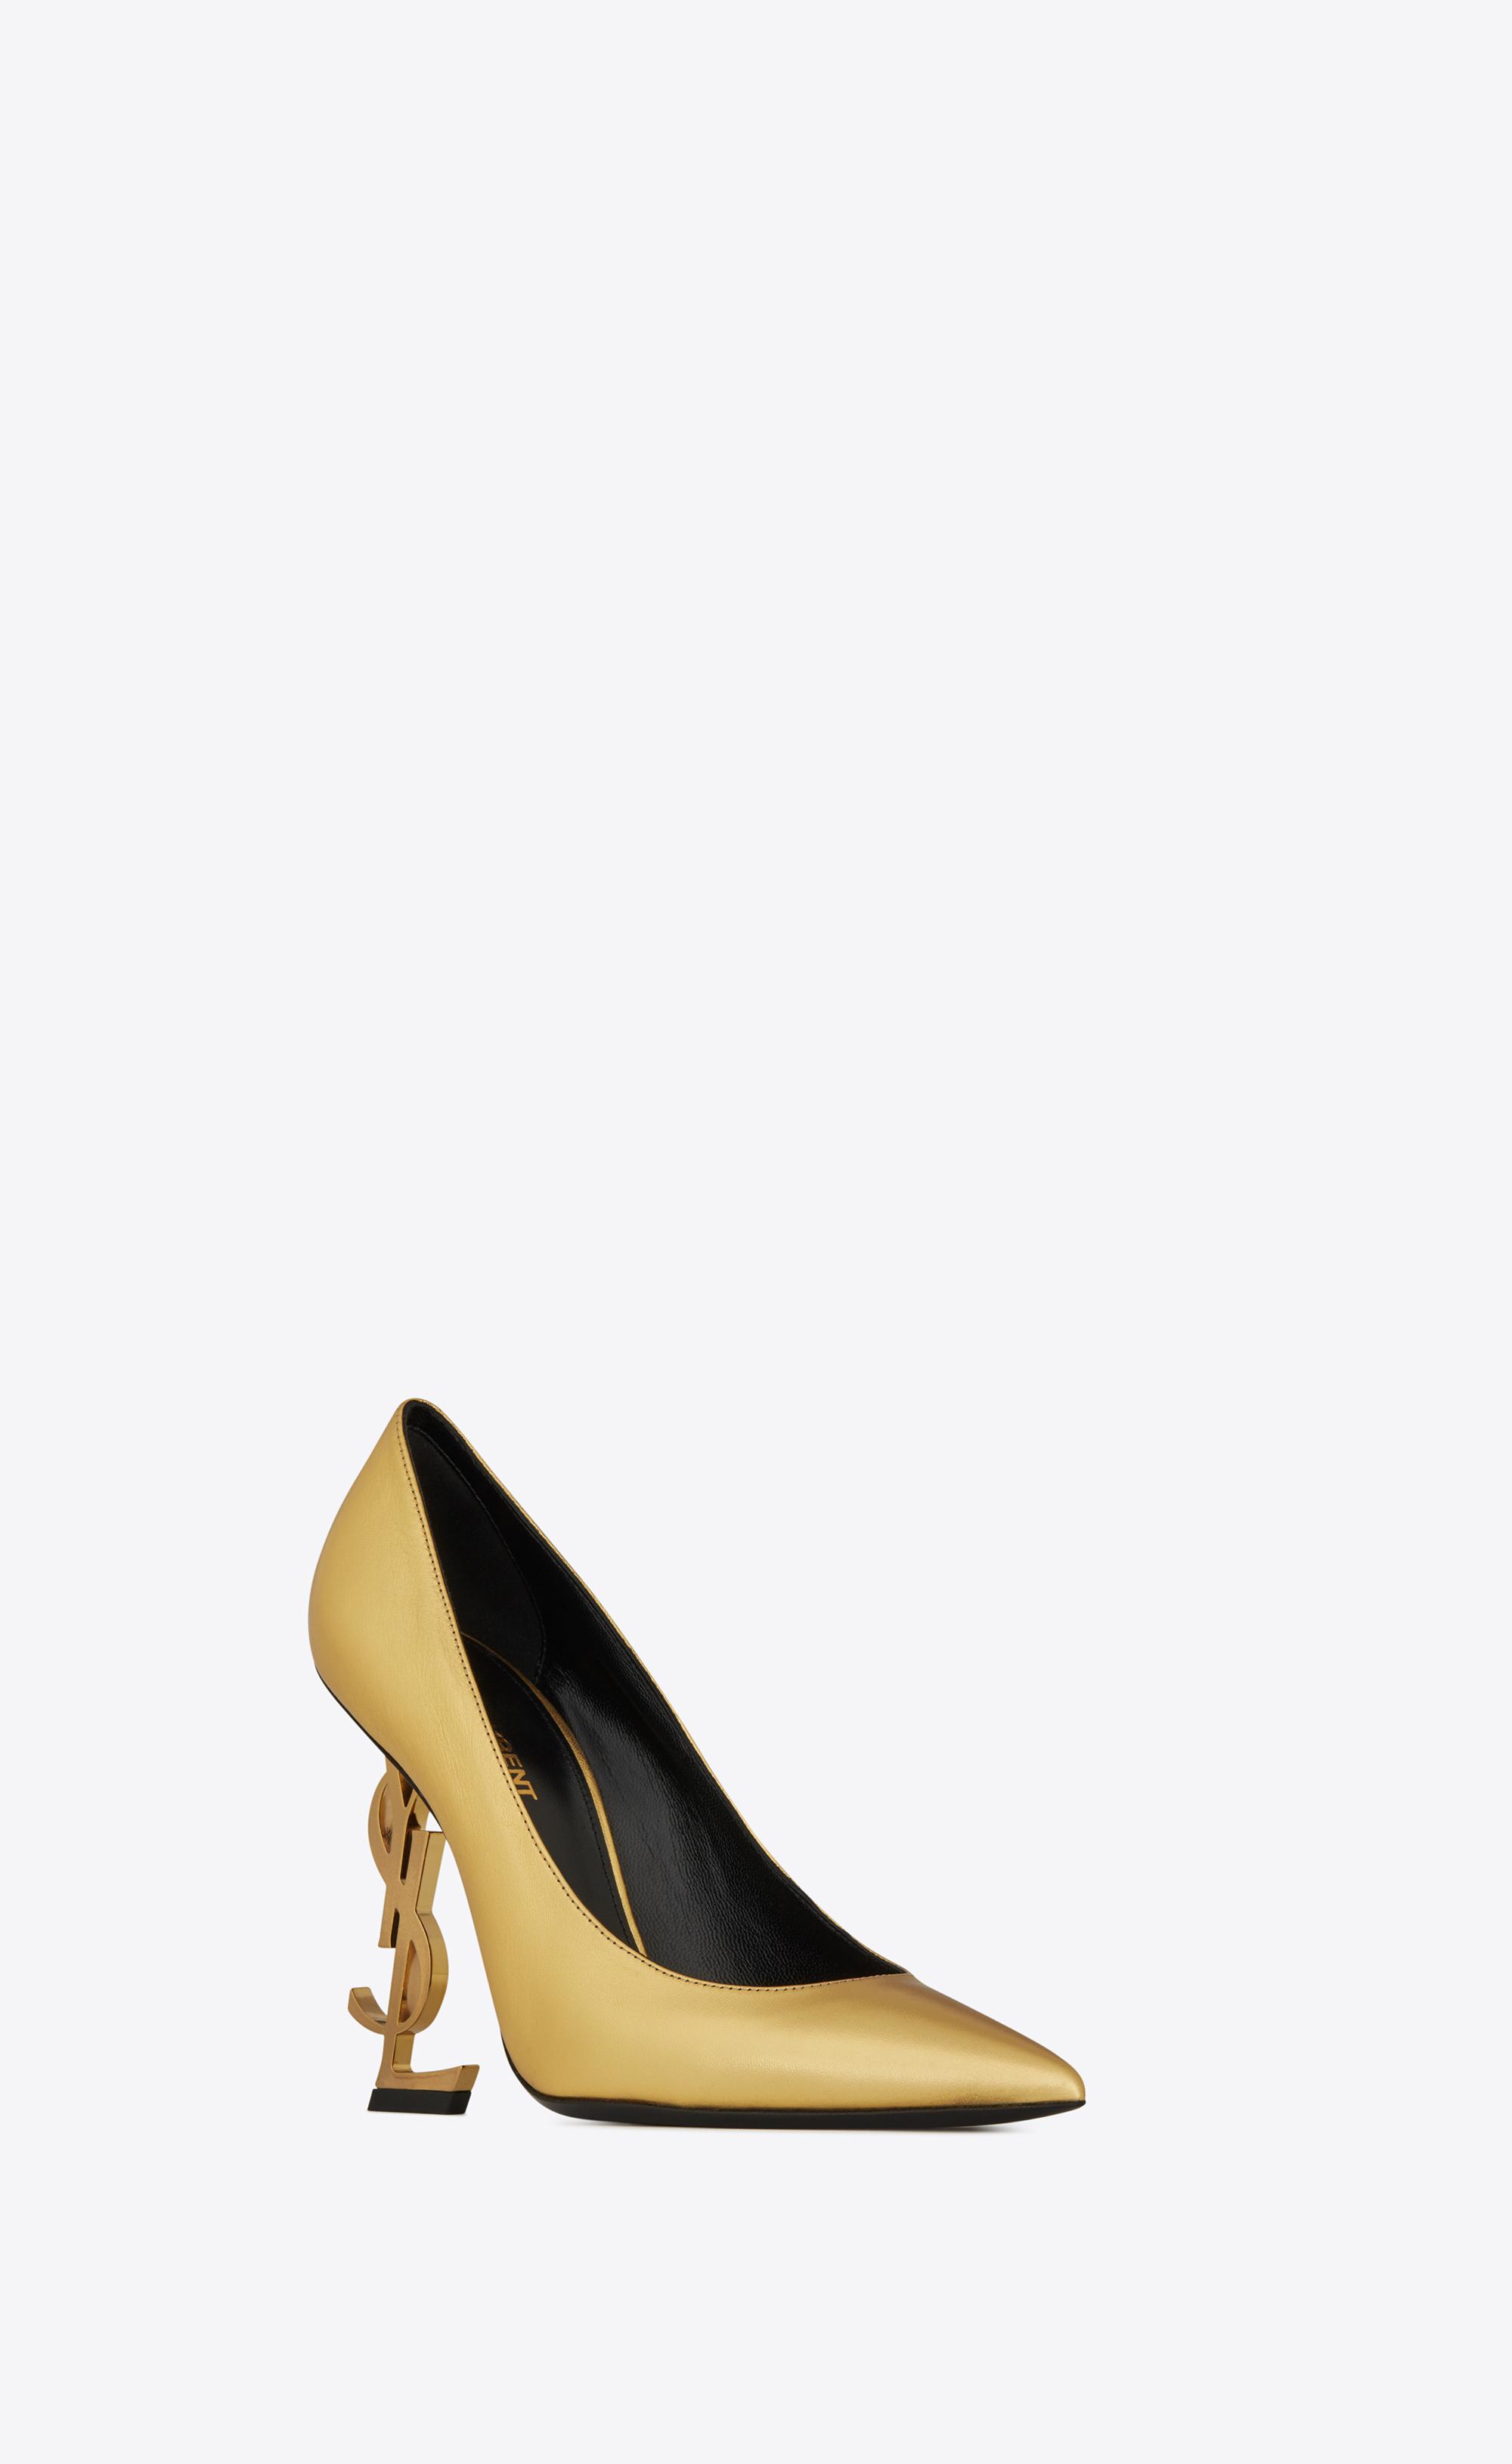 Saint Laurent Opyum Pumps With Gold-toned Heel In Smooth Leather in ...